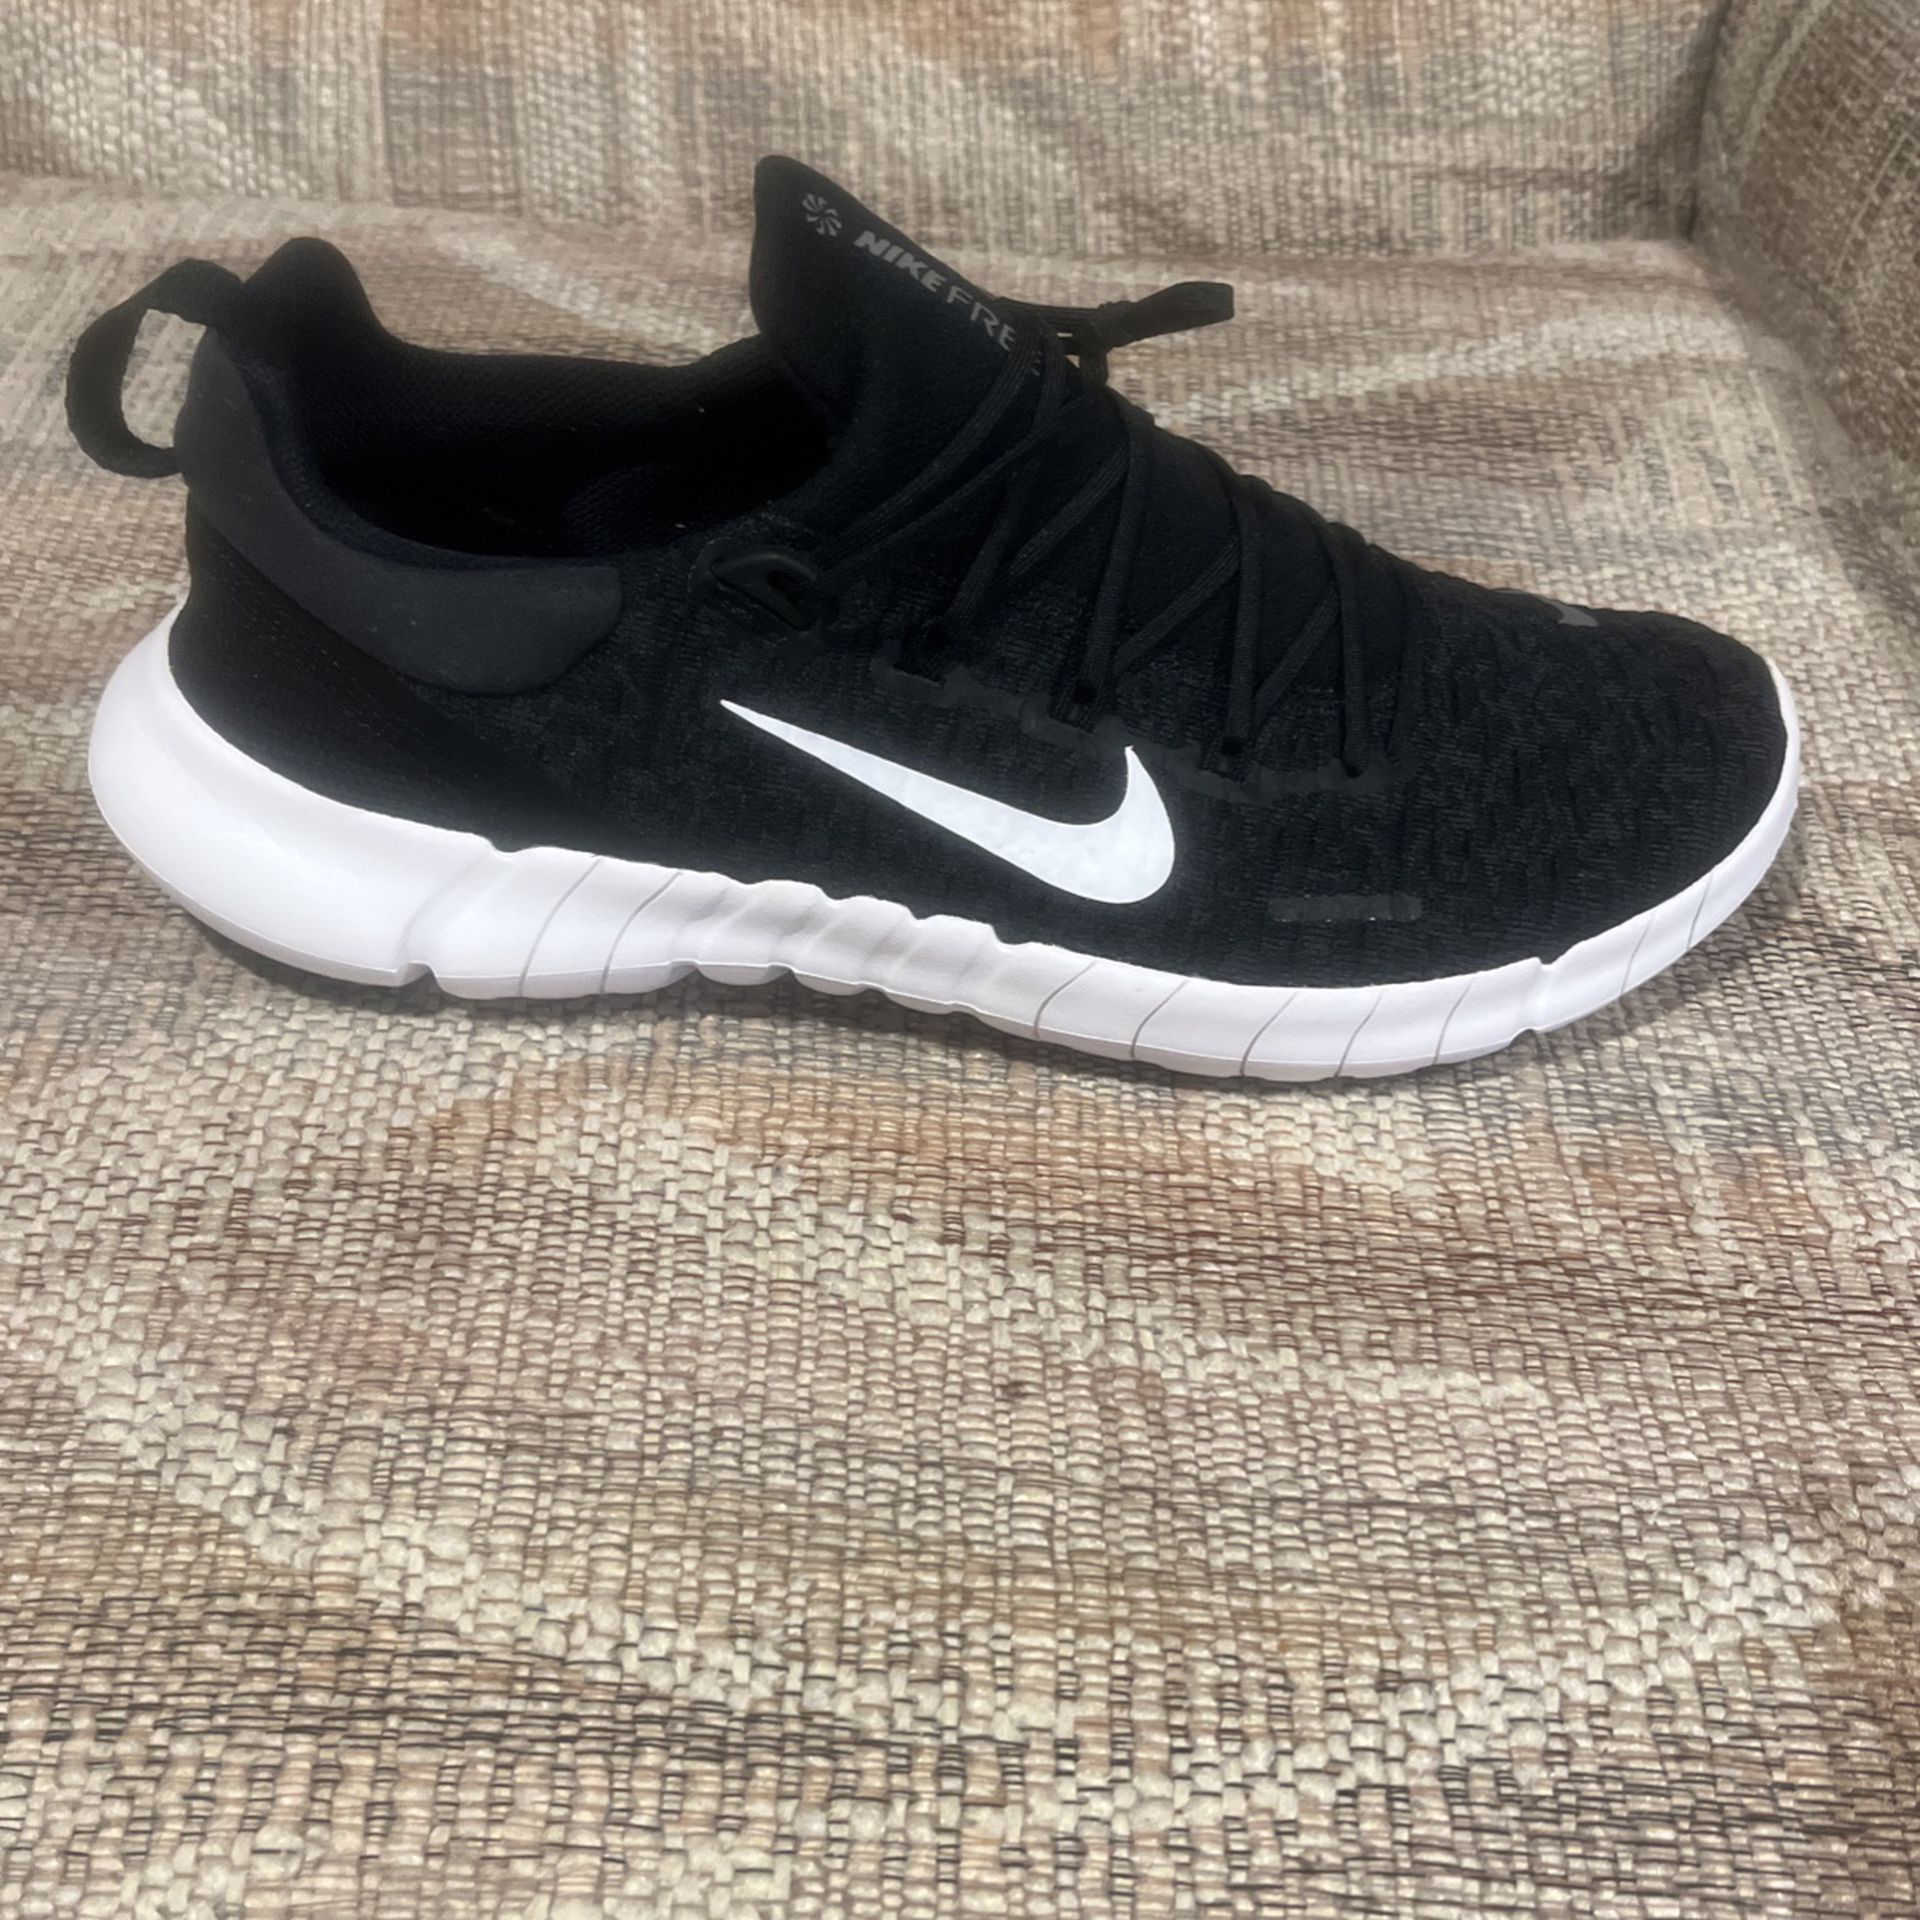 NIKE Free 5.0 Black and White Sale in East Meadow, OfferUp